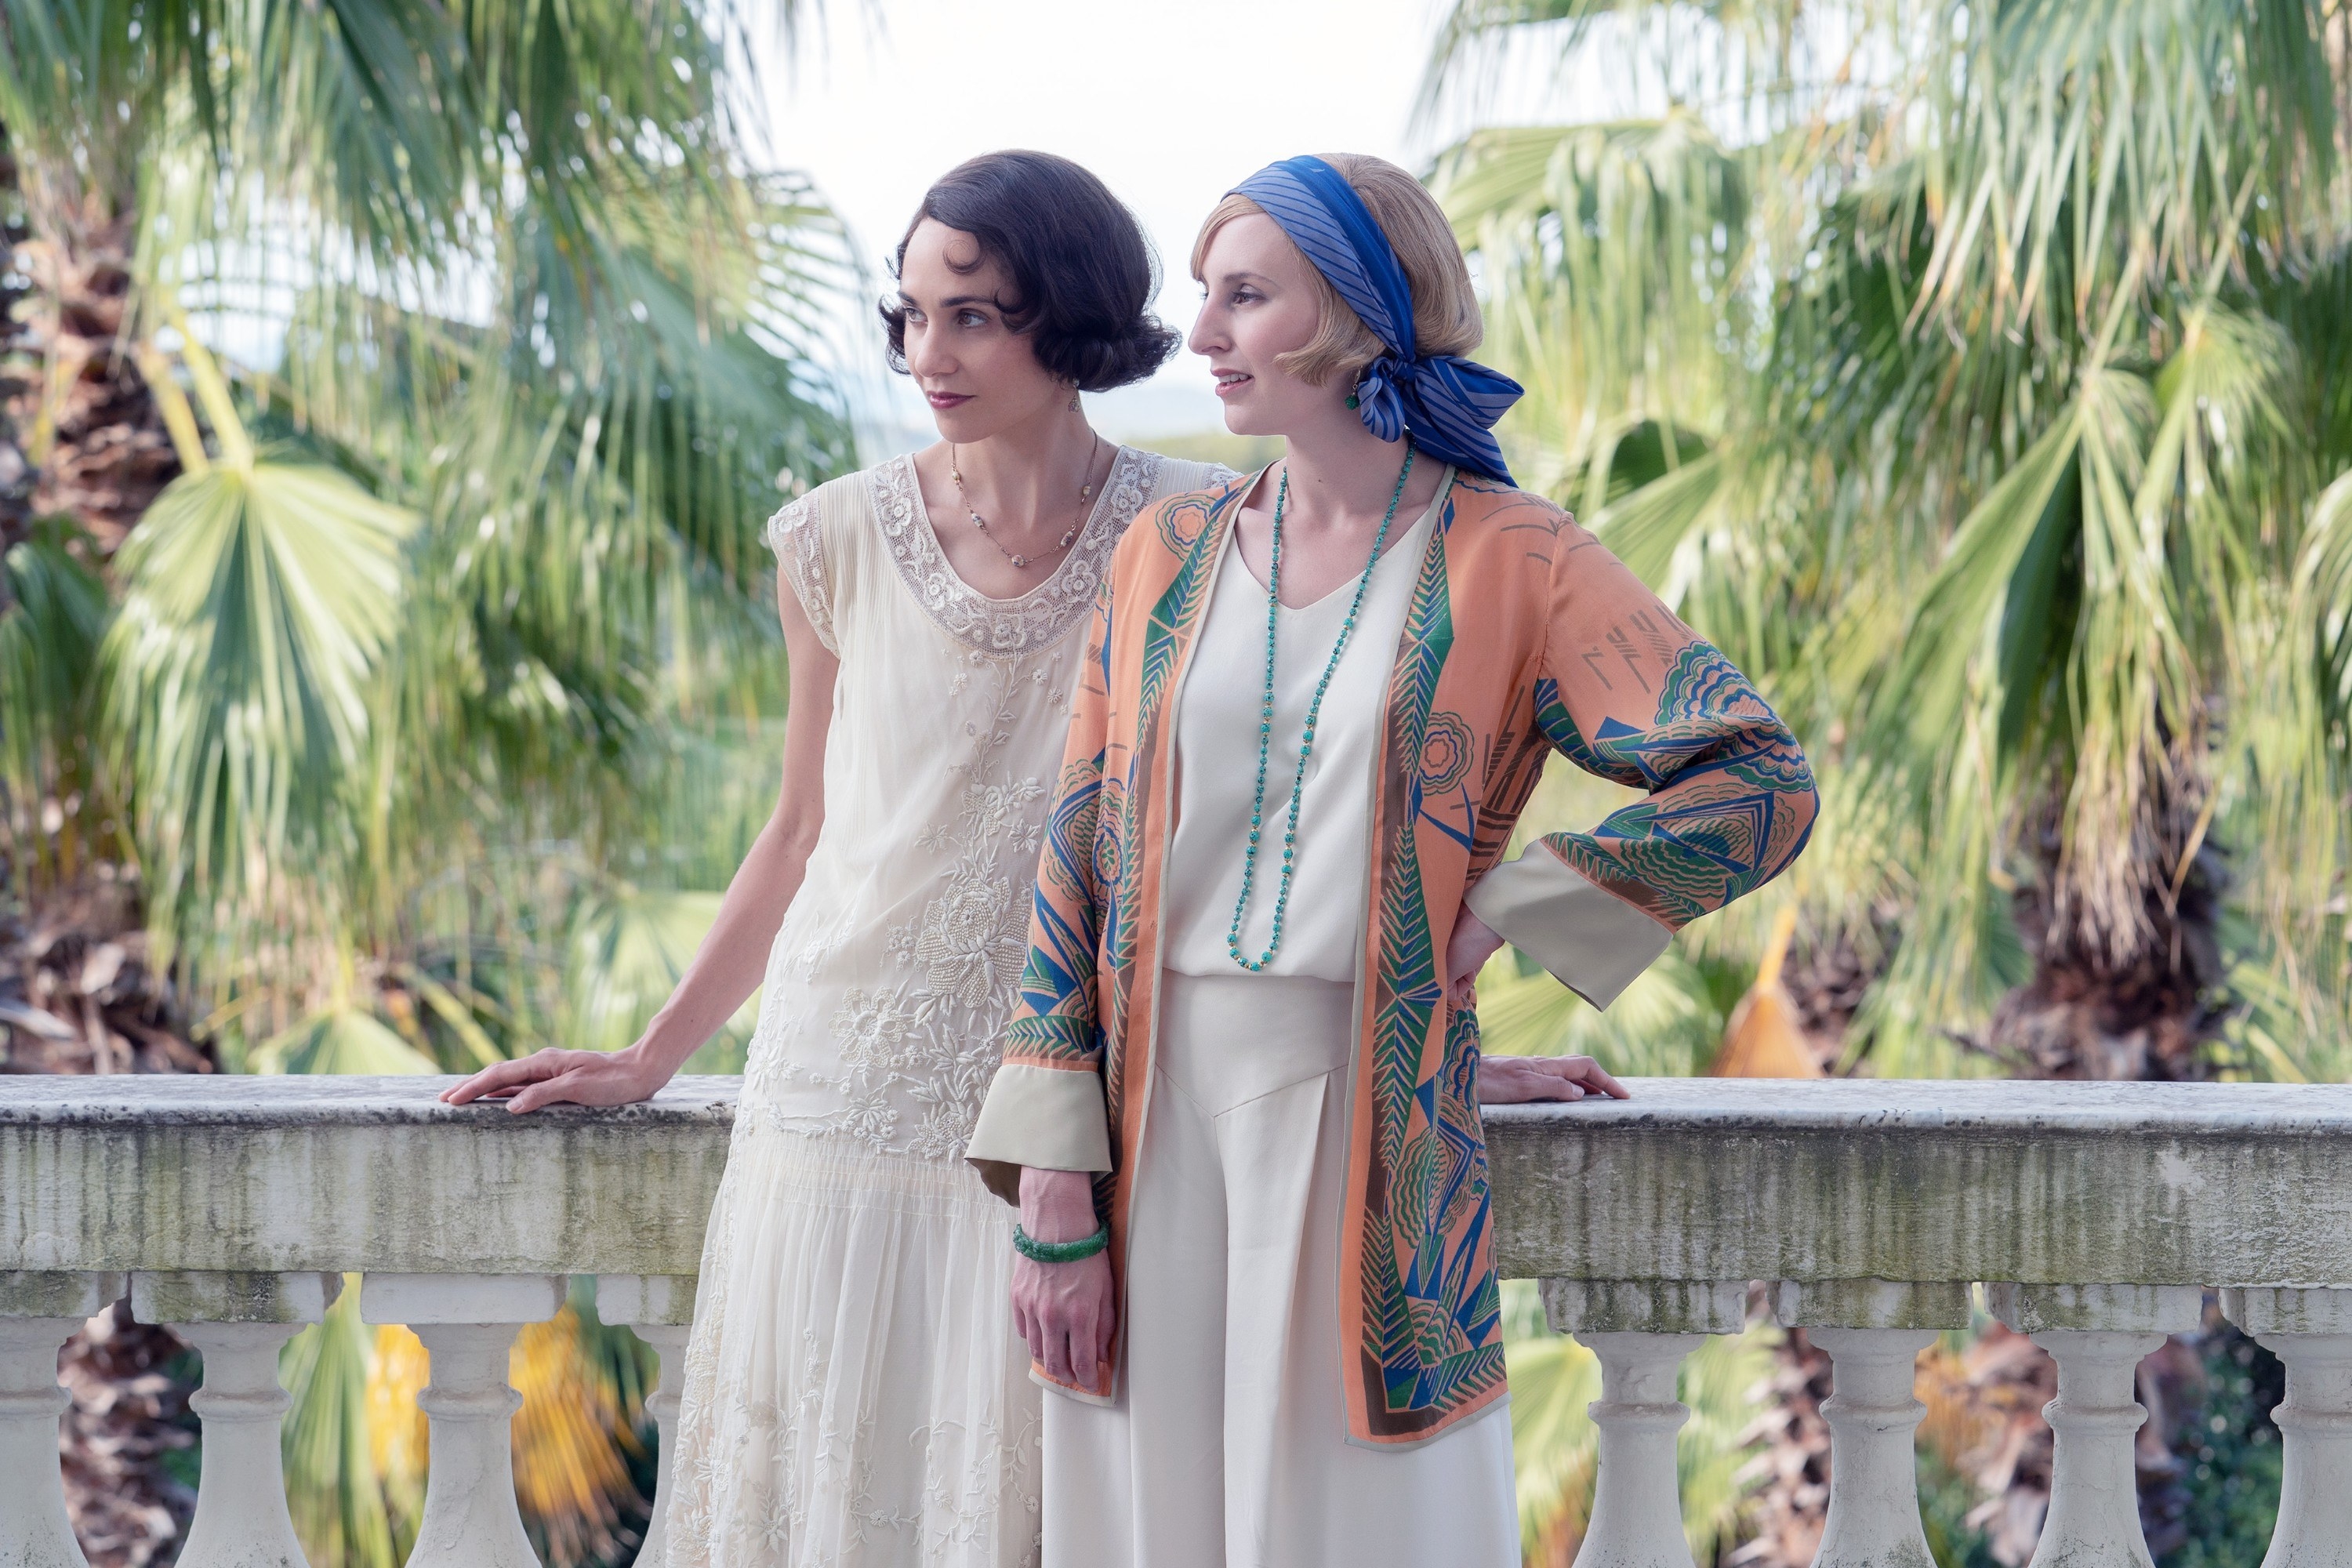 Tuppence Middleton and Laura Carmichael stand outside on a villa balcony in Downton Abbey: A New Era.